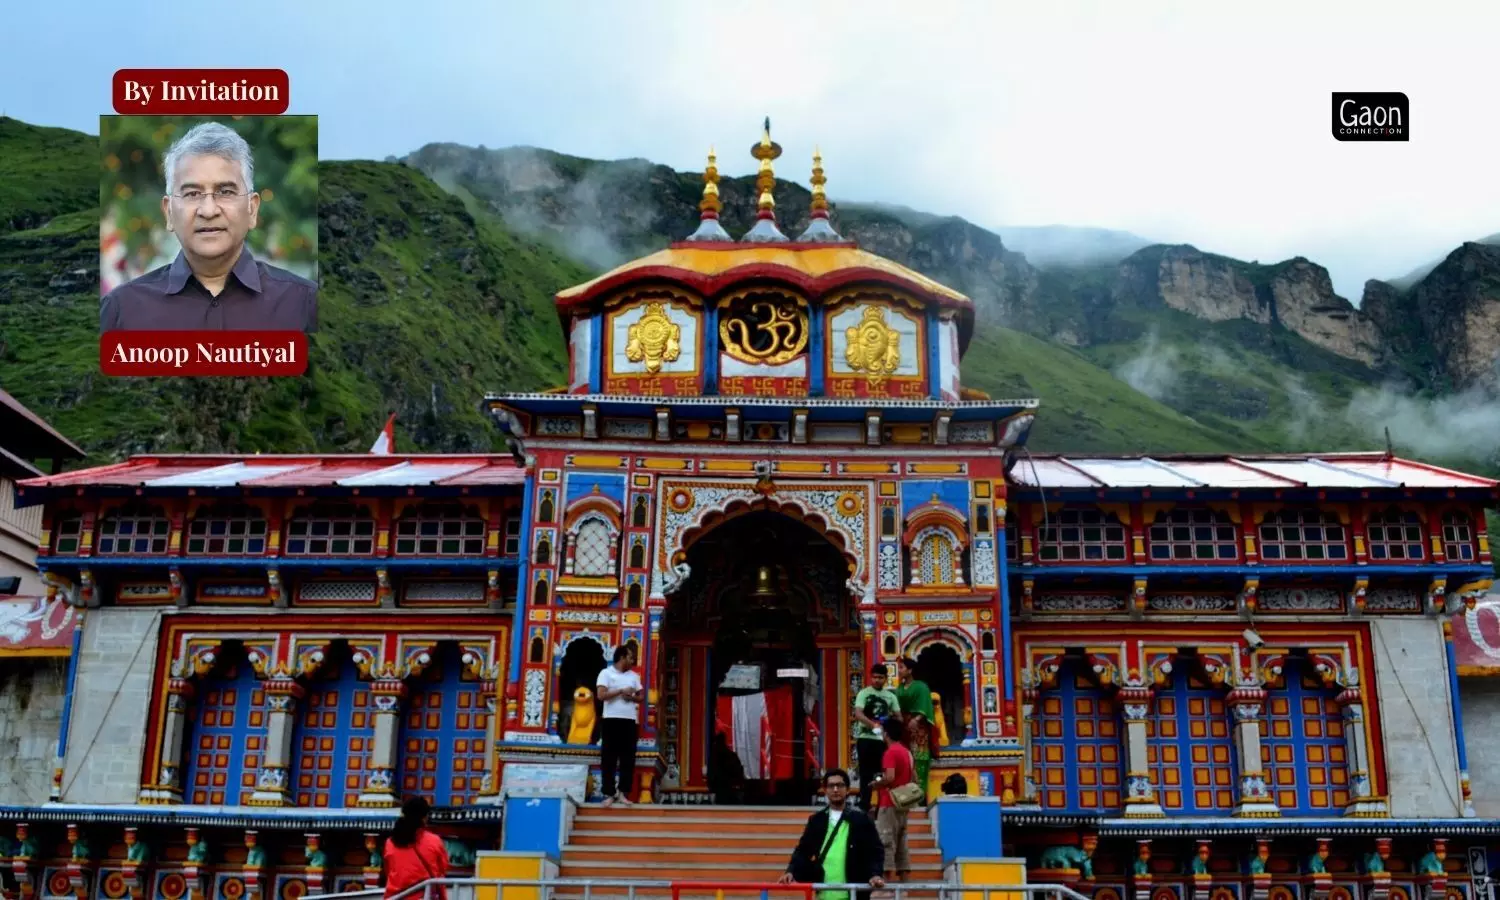 Badrinath: From Holy Dham to a Smart Dham, via shopping plazas and a riverfront